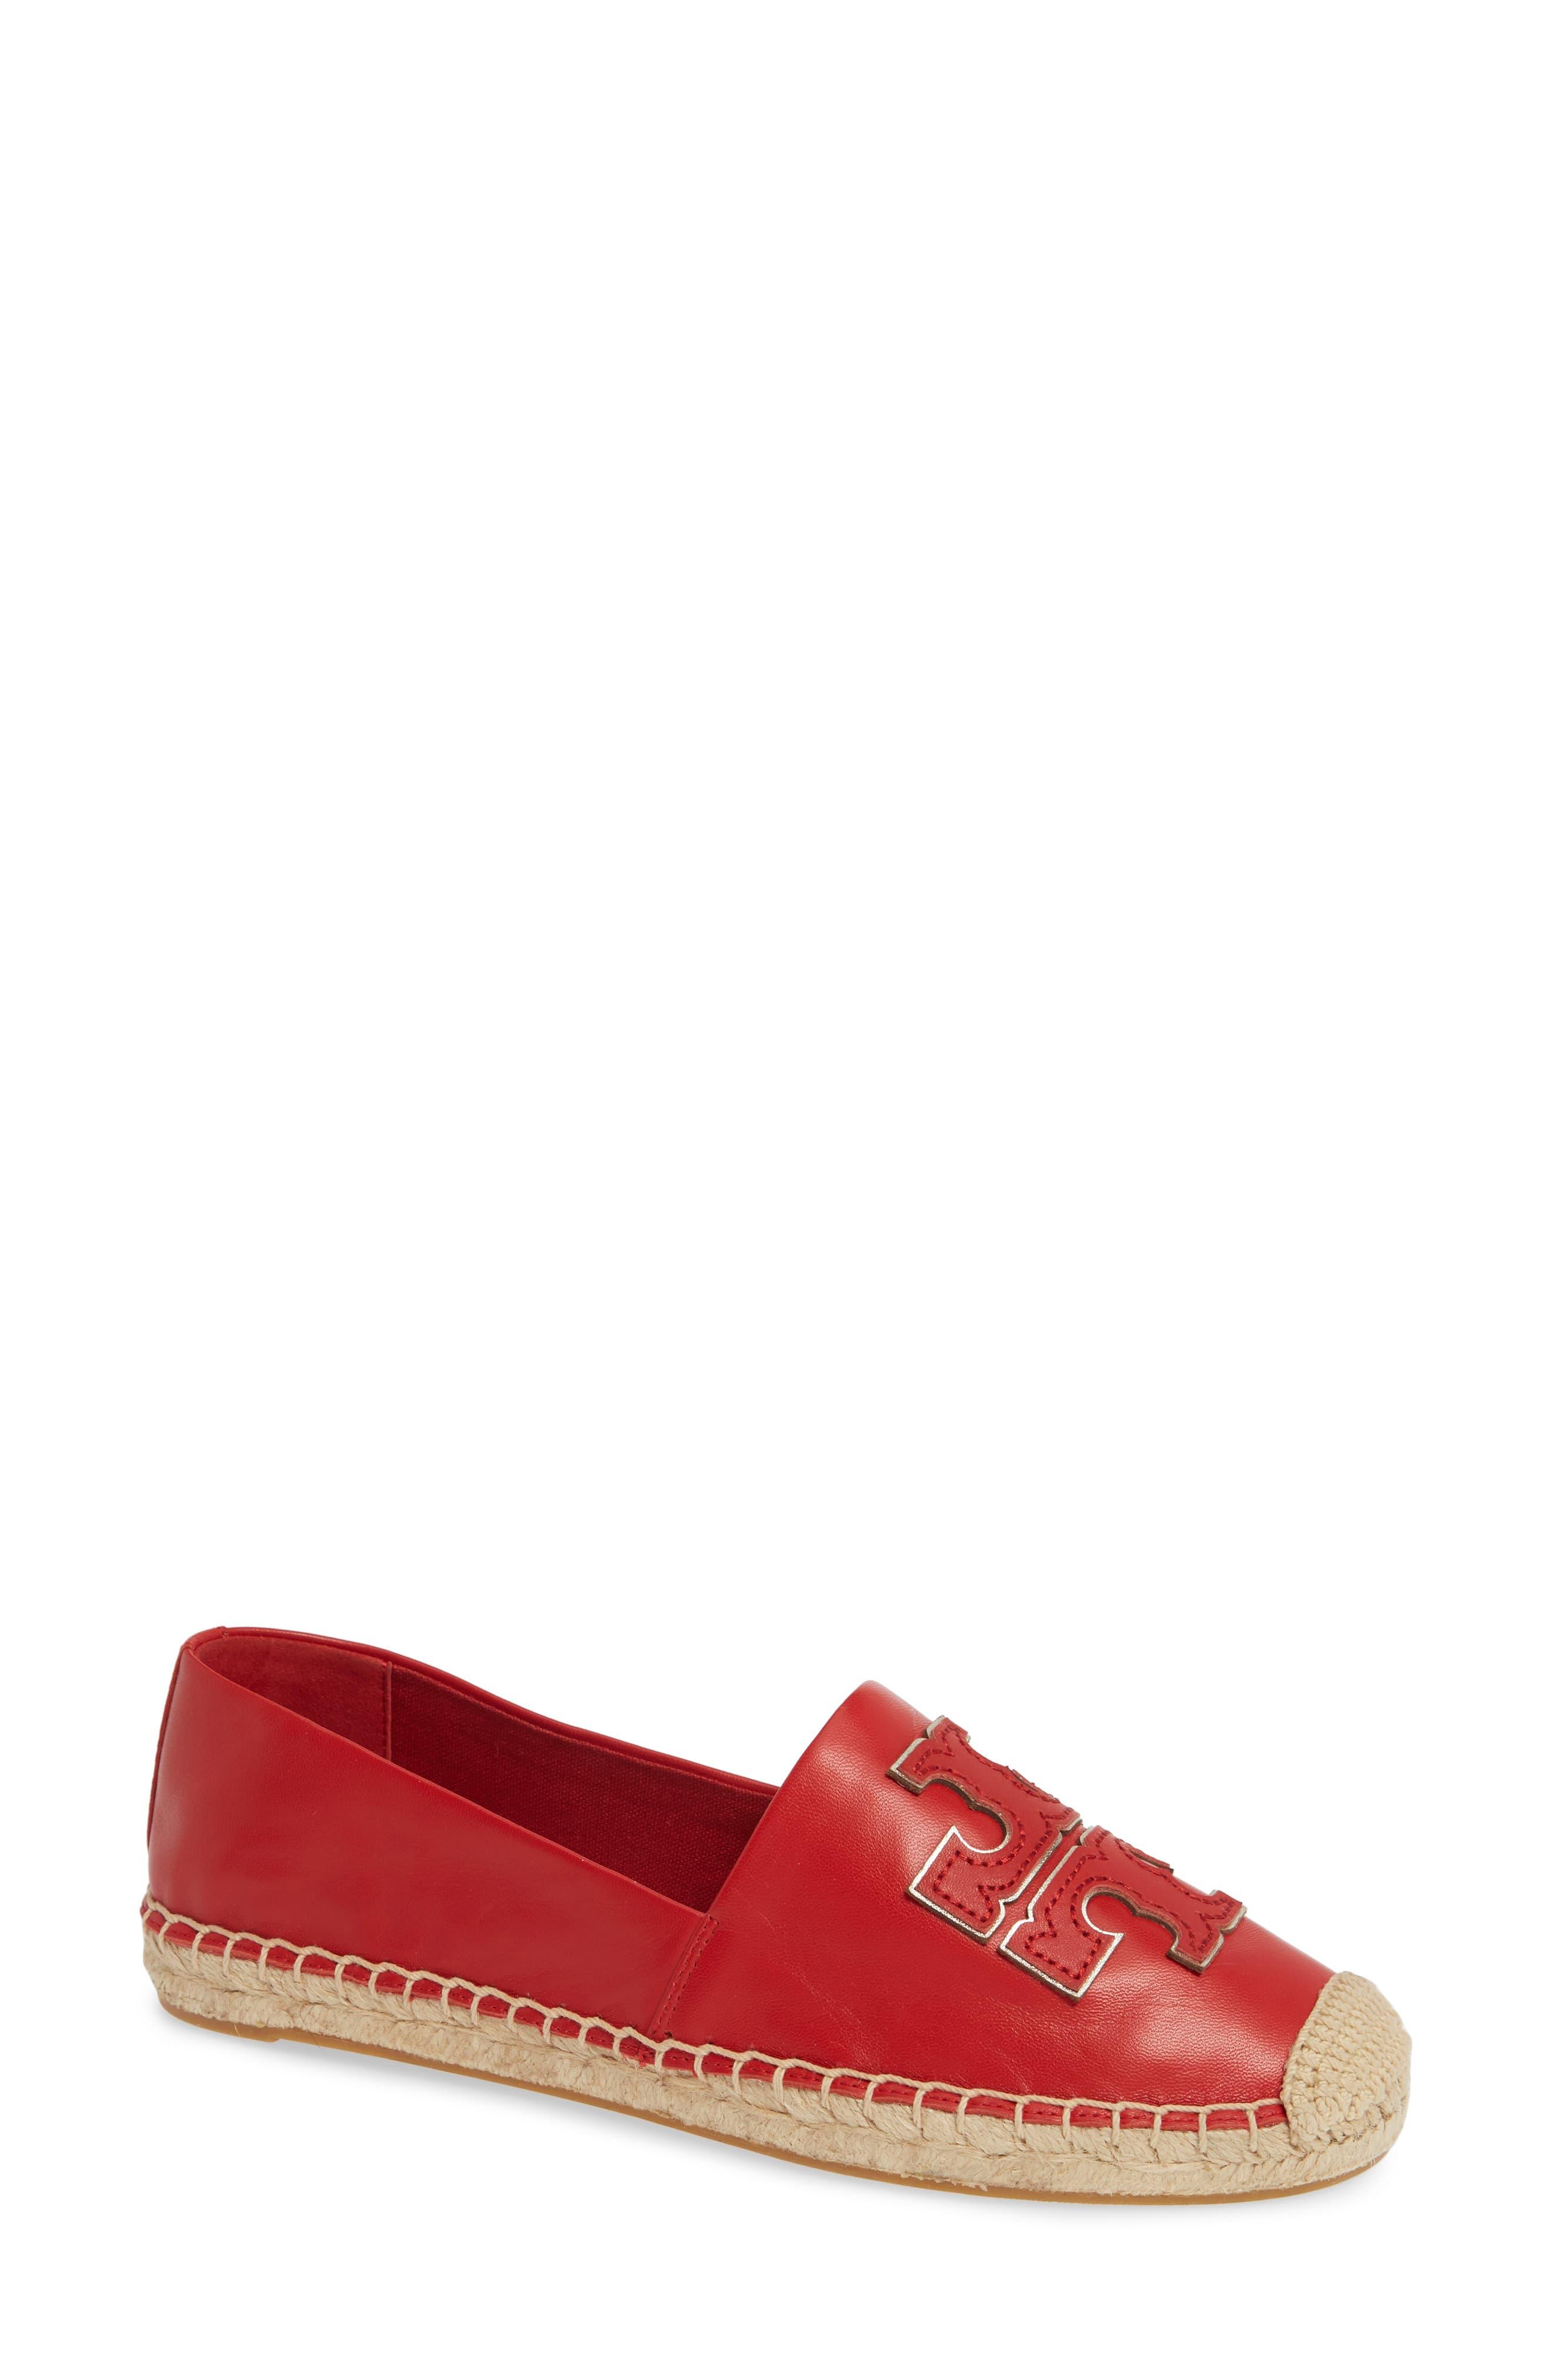 Tory Burch Ines Espadrille in Red - Save 33% - Lyst